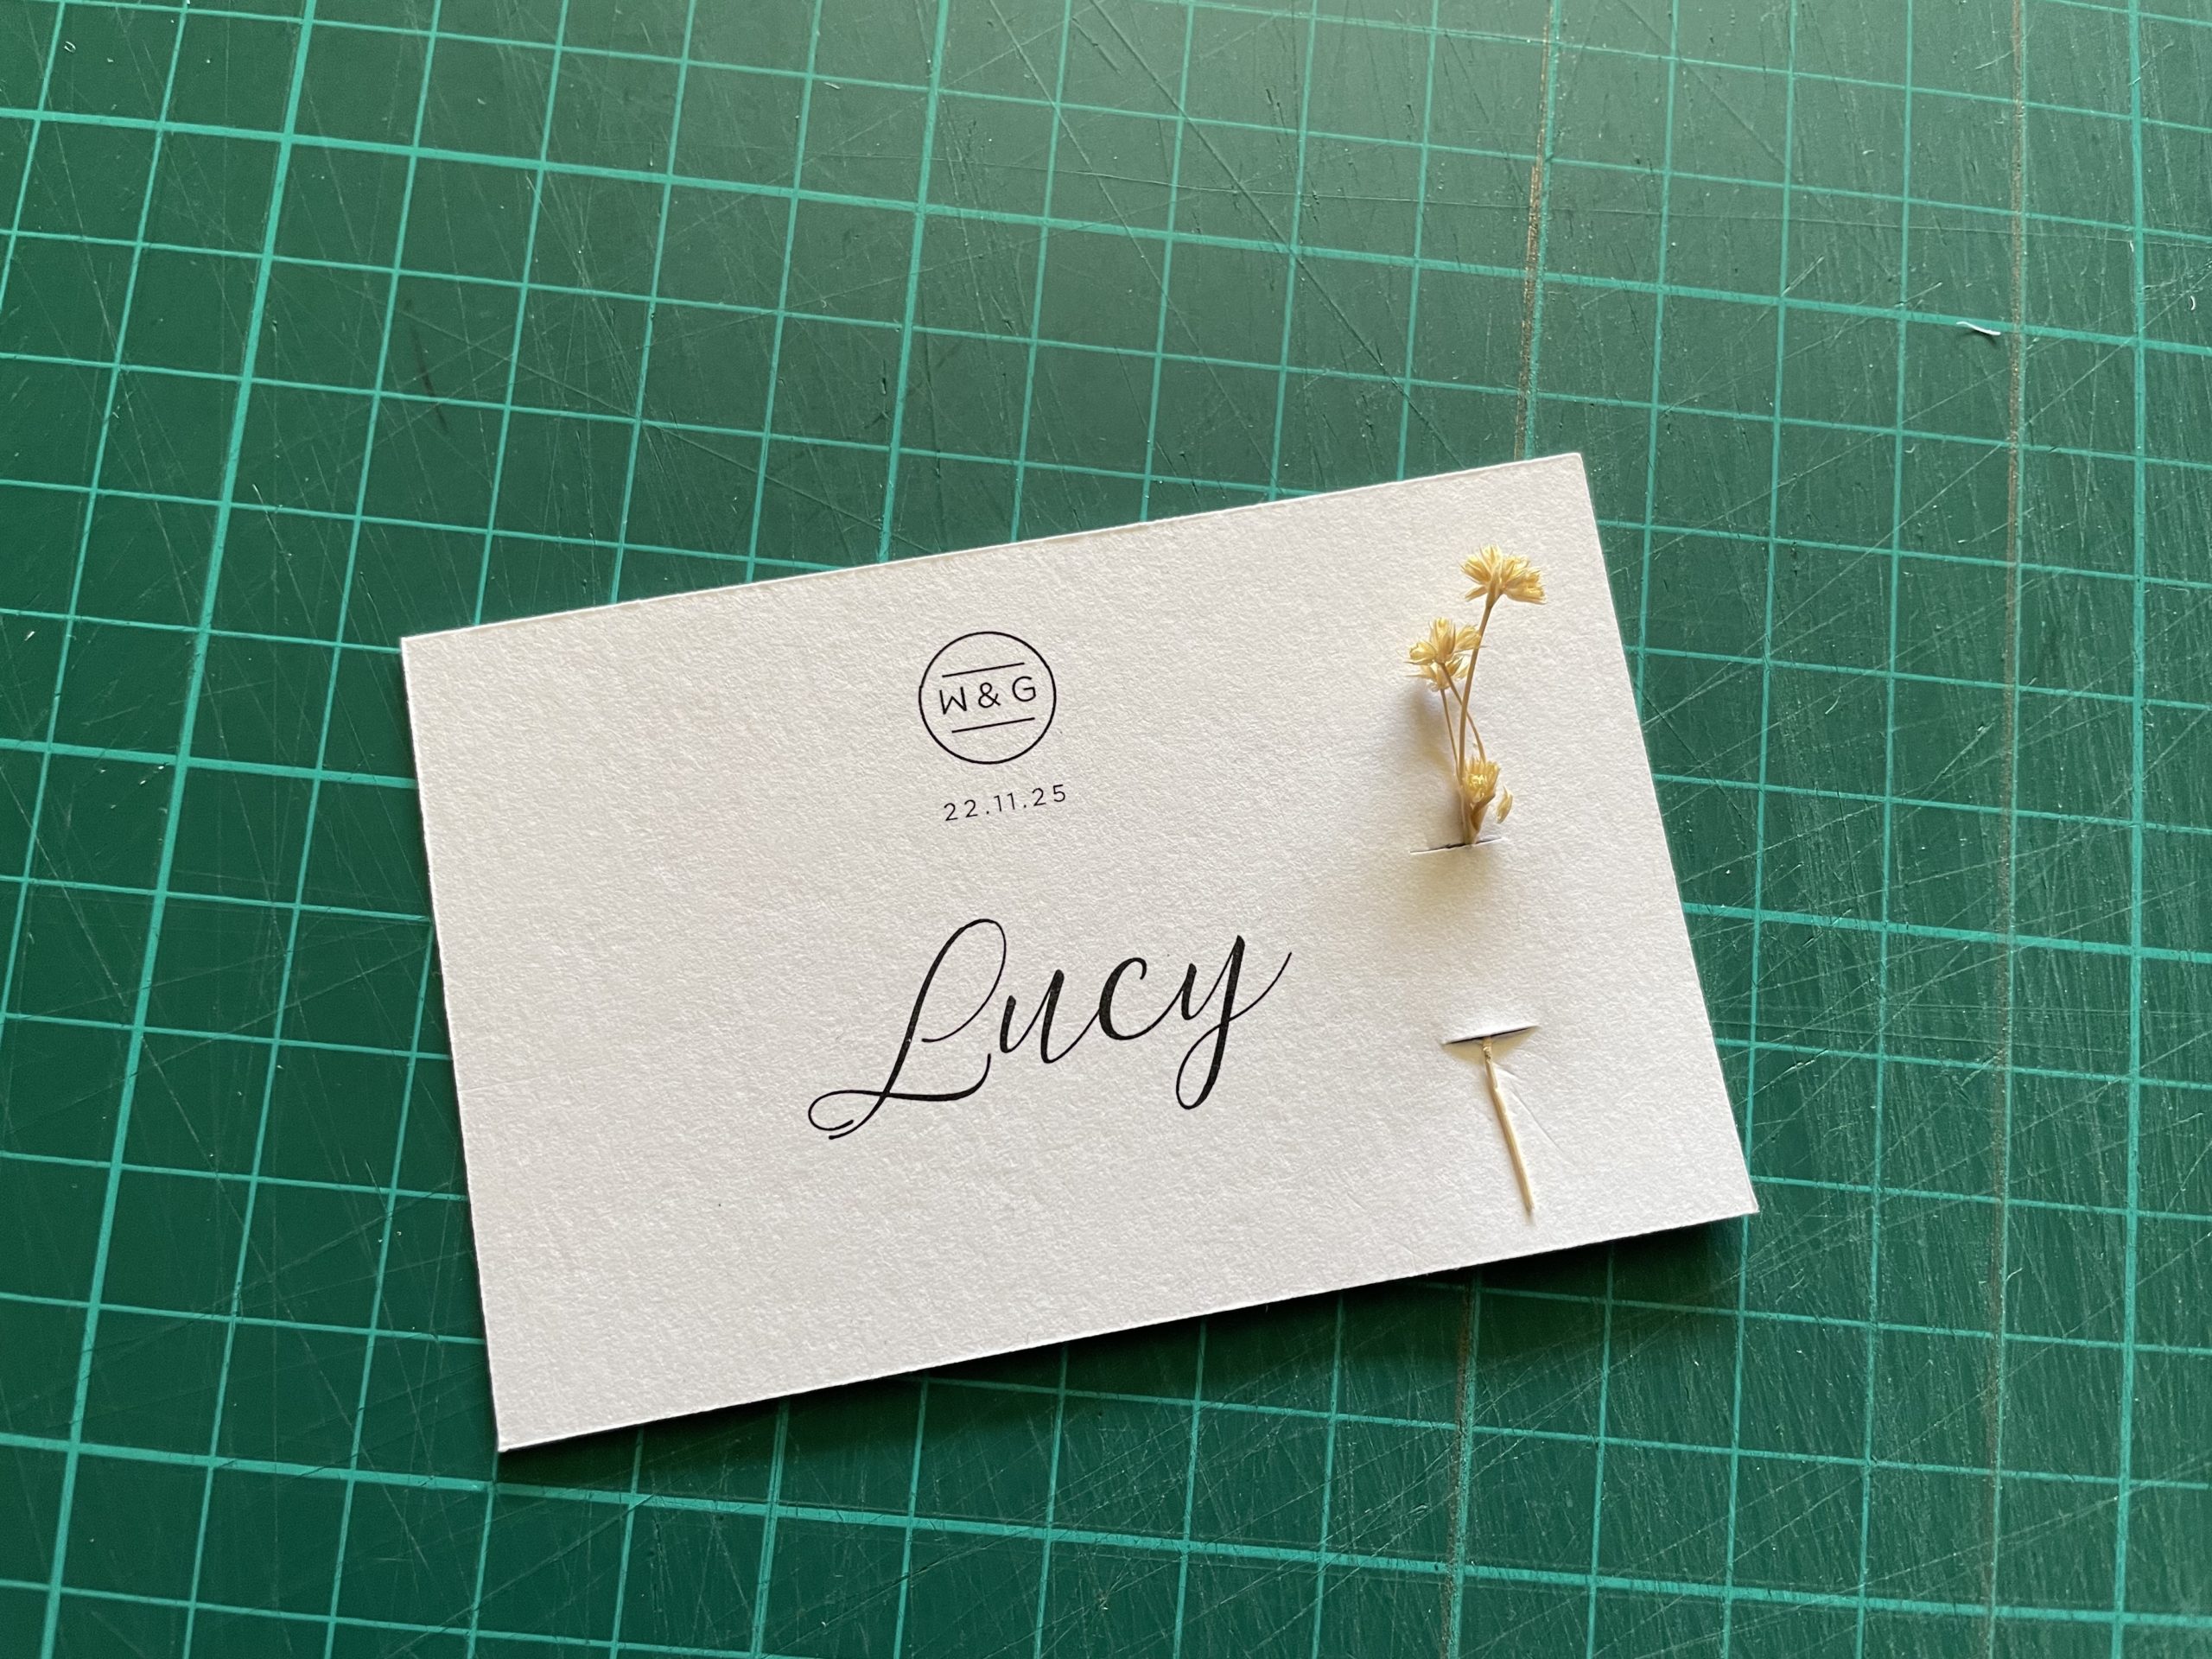 DIY place card with a flower stem on the side